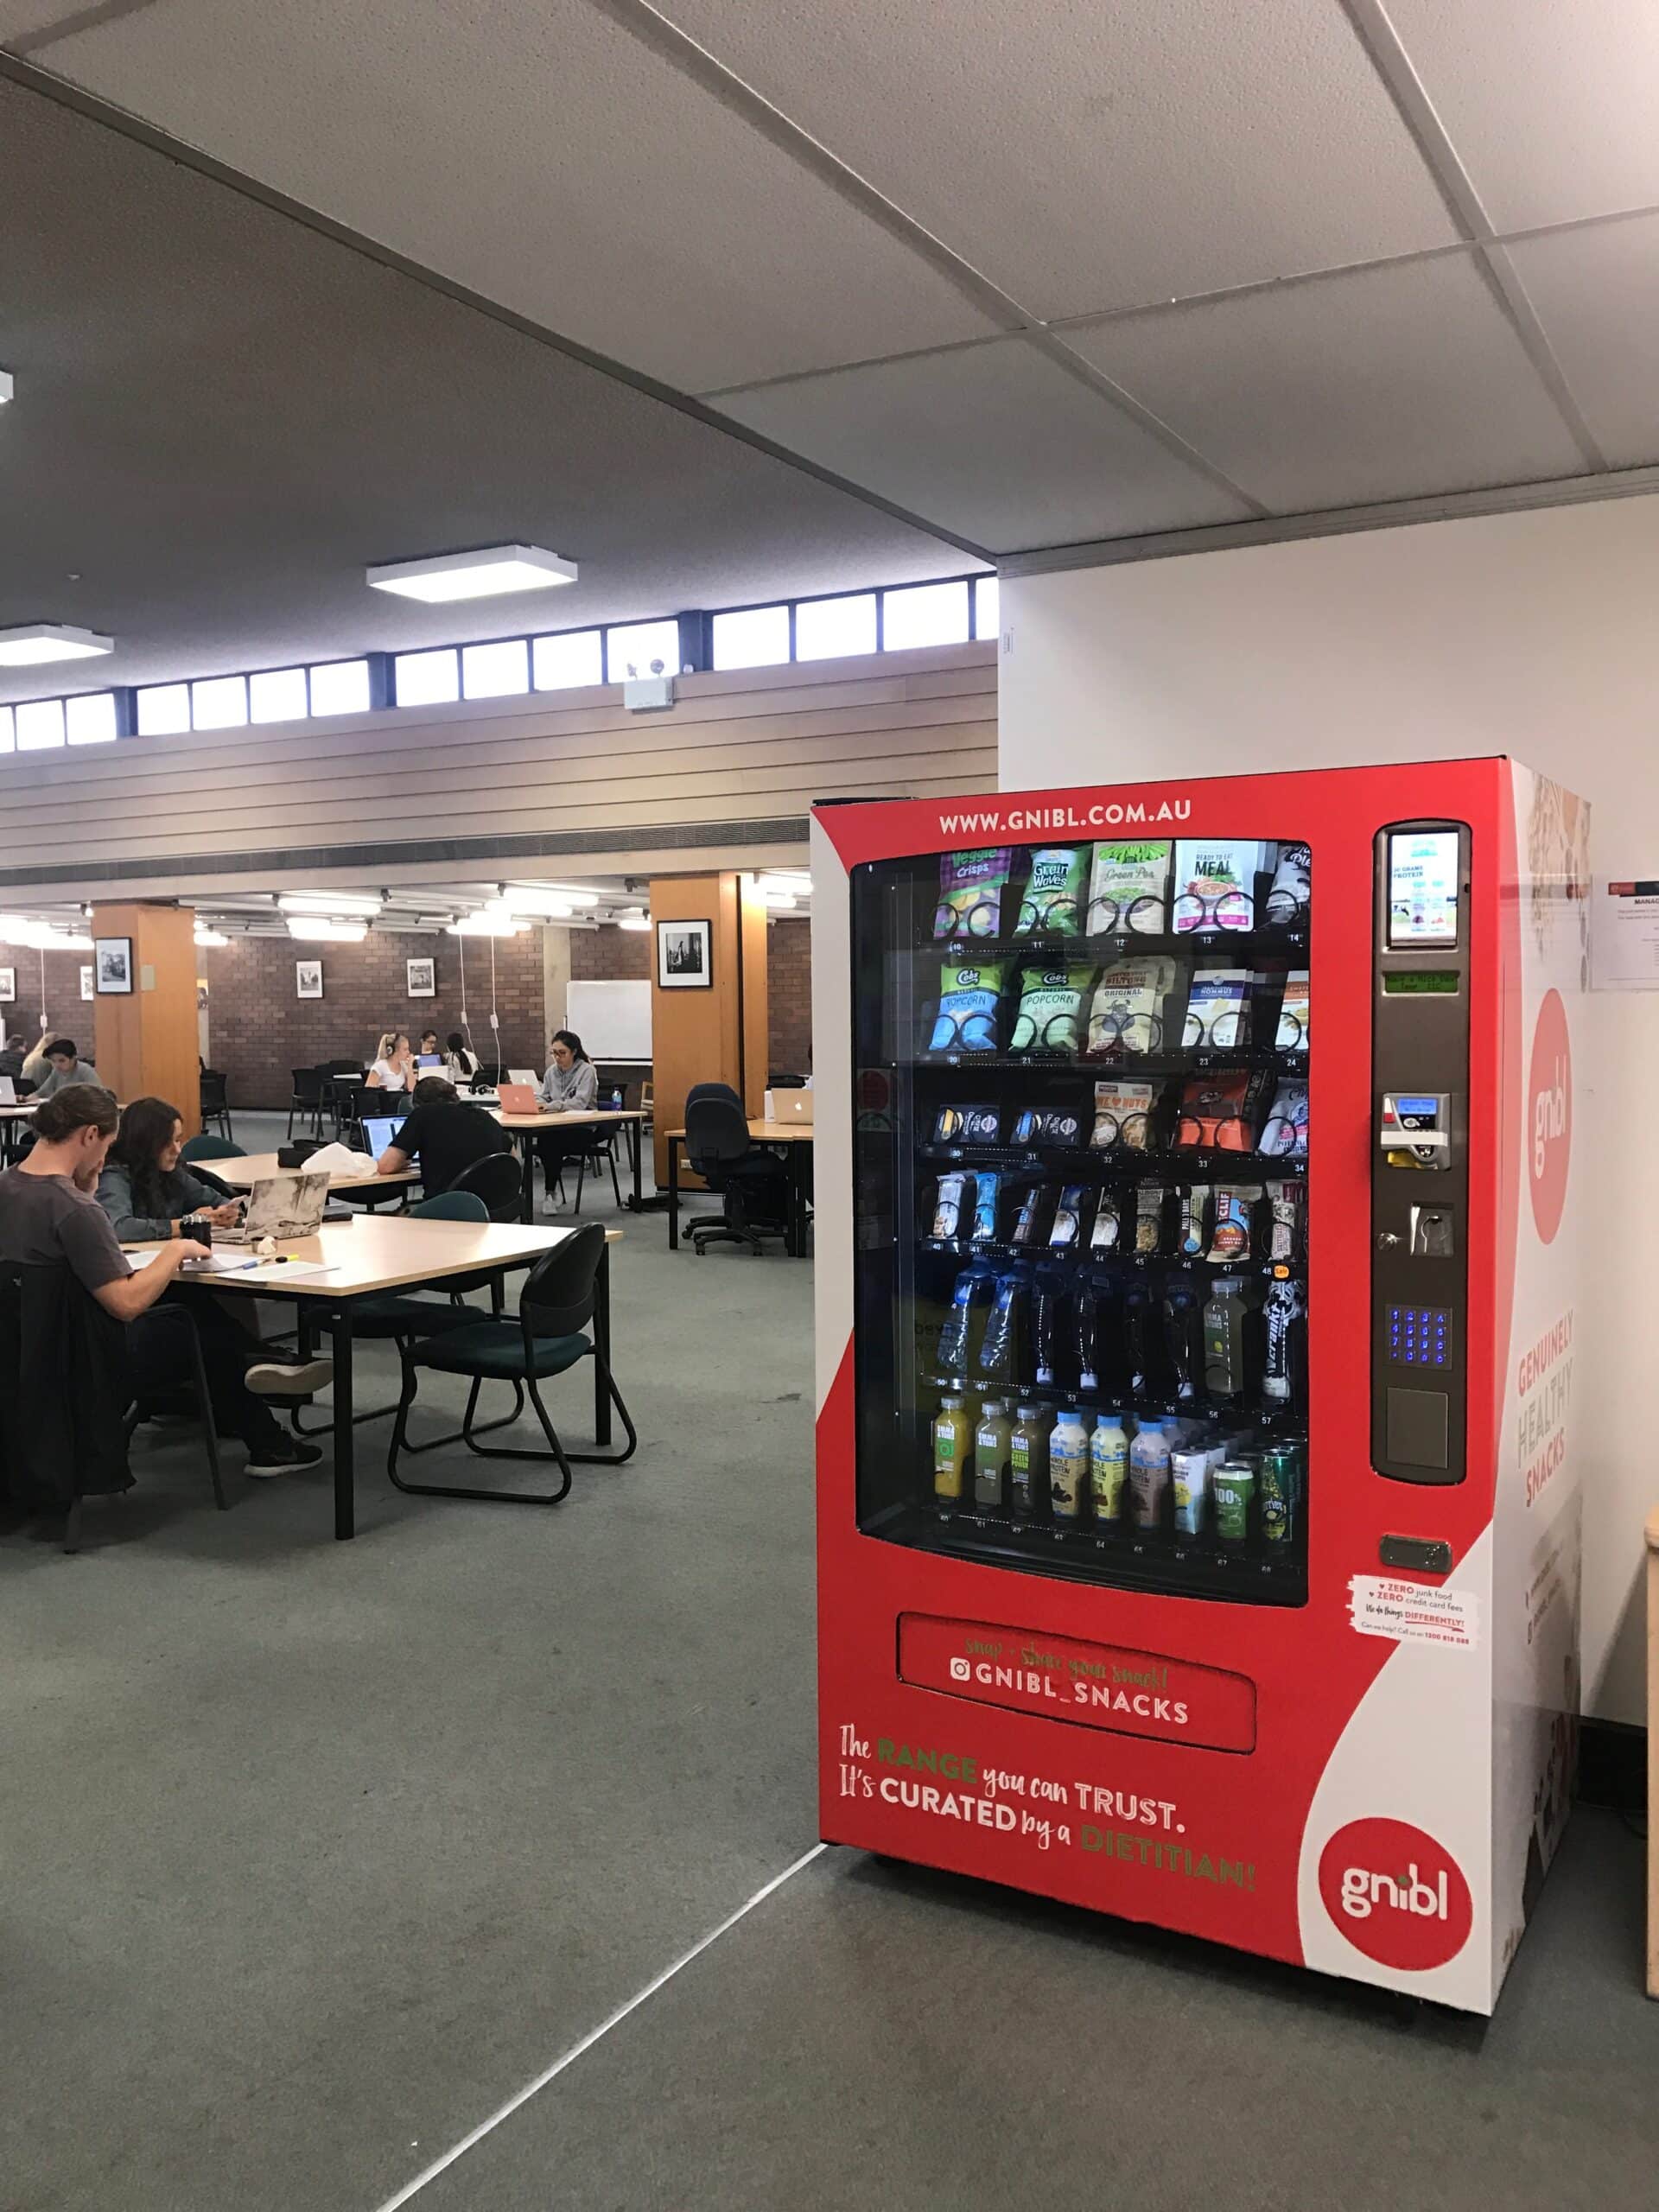 a fully stocked gnibl vending machine in an office